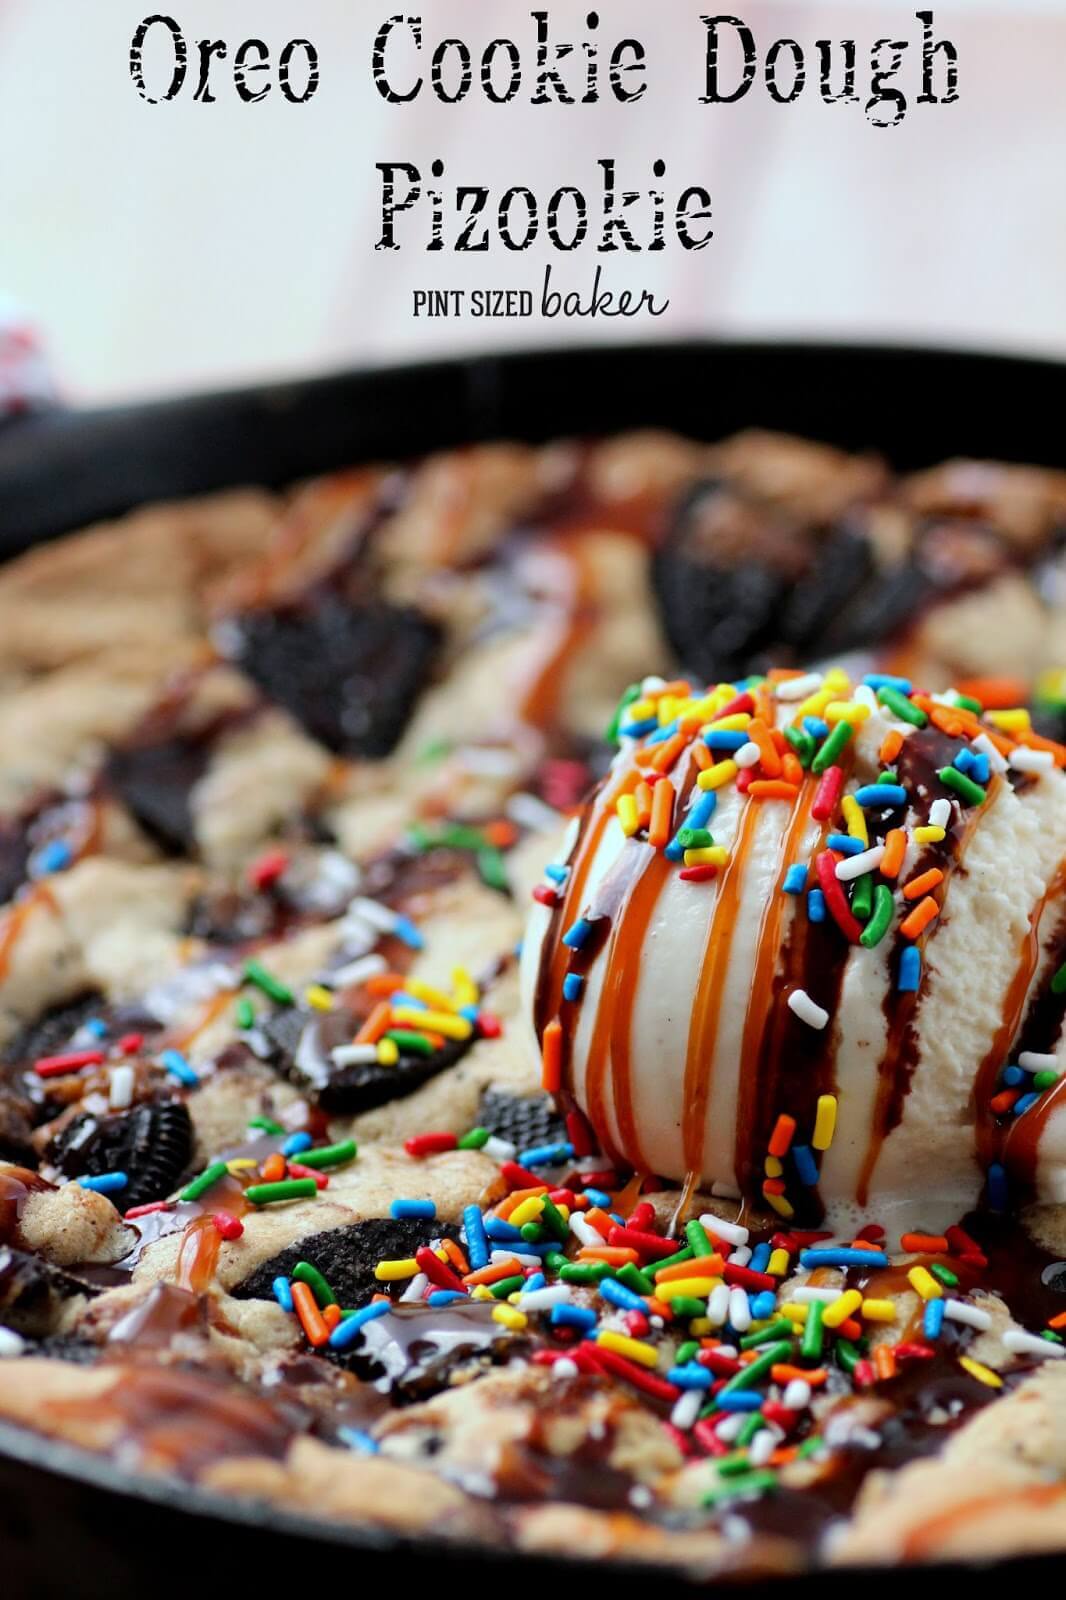 Bake a giant cookie in a skillet and cover it in Oreo Cookie chunks!!